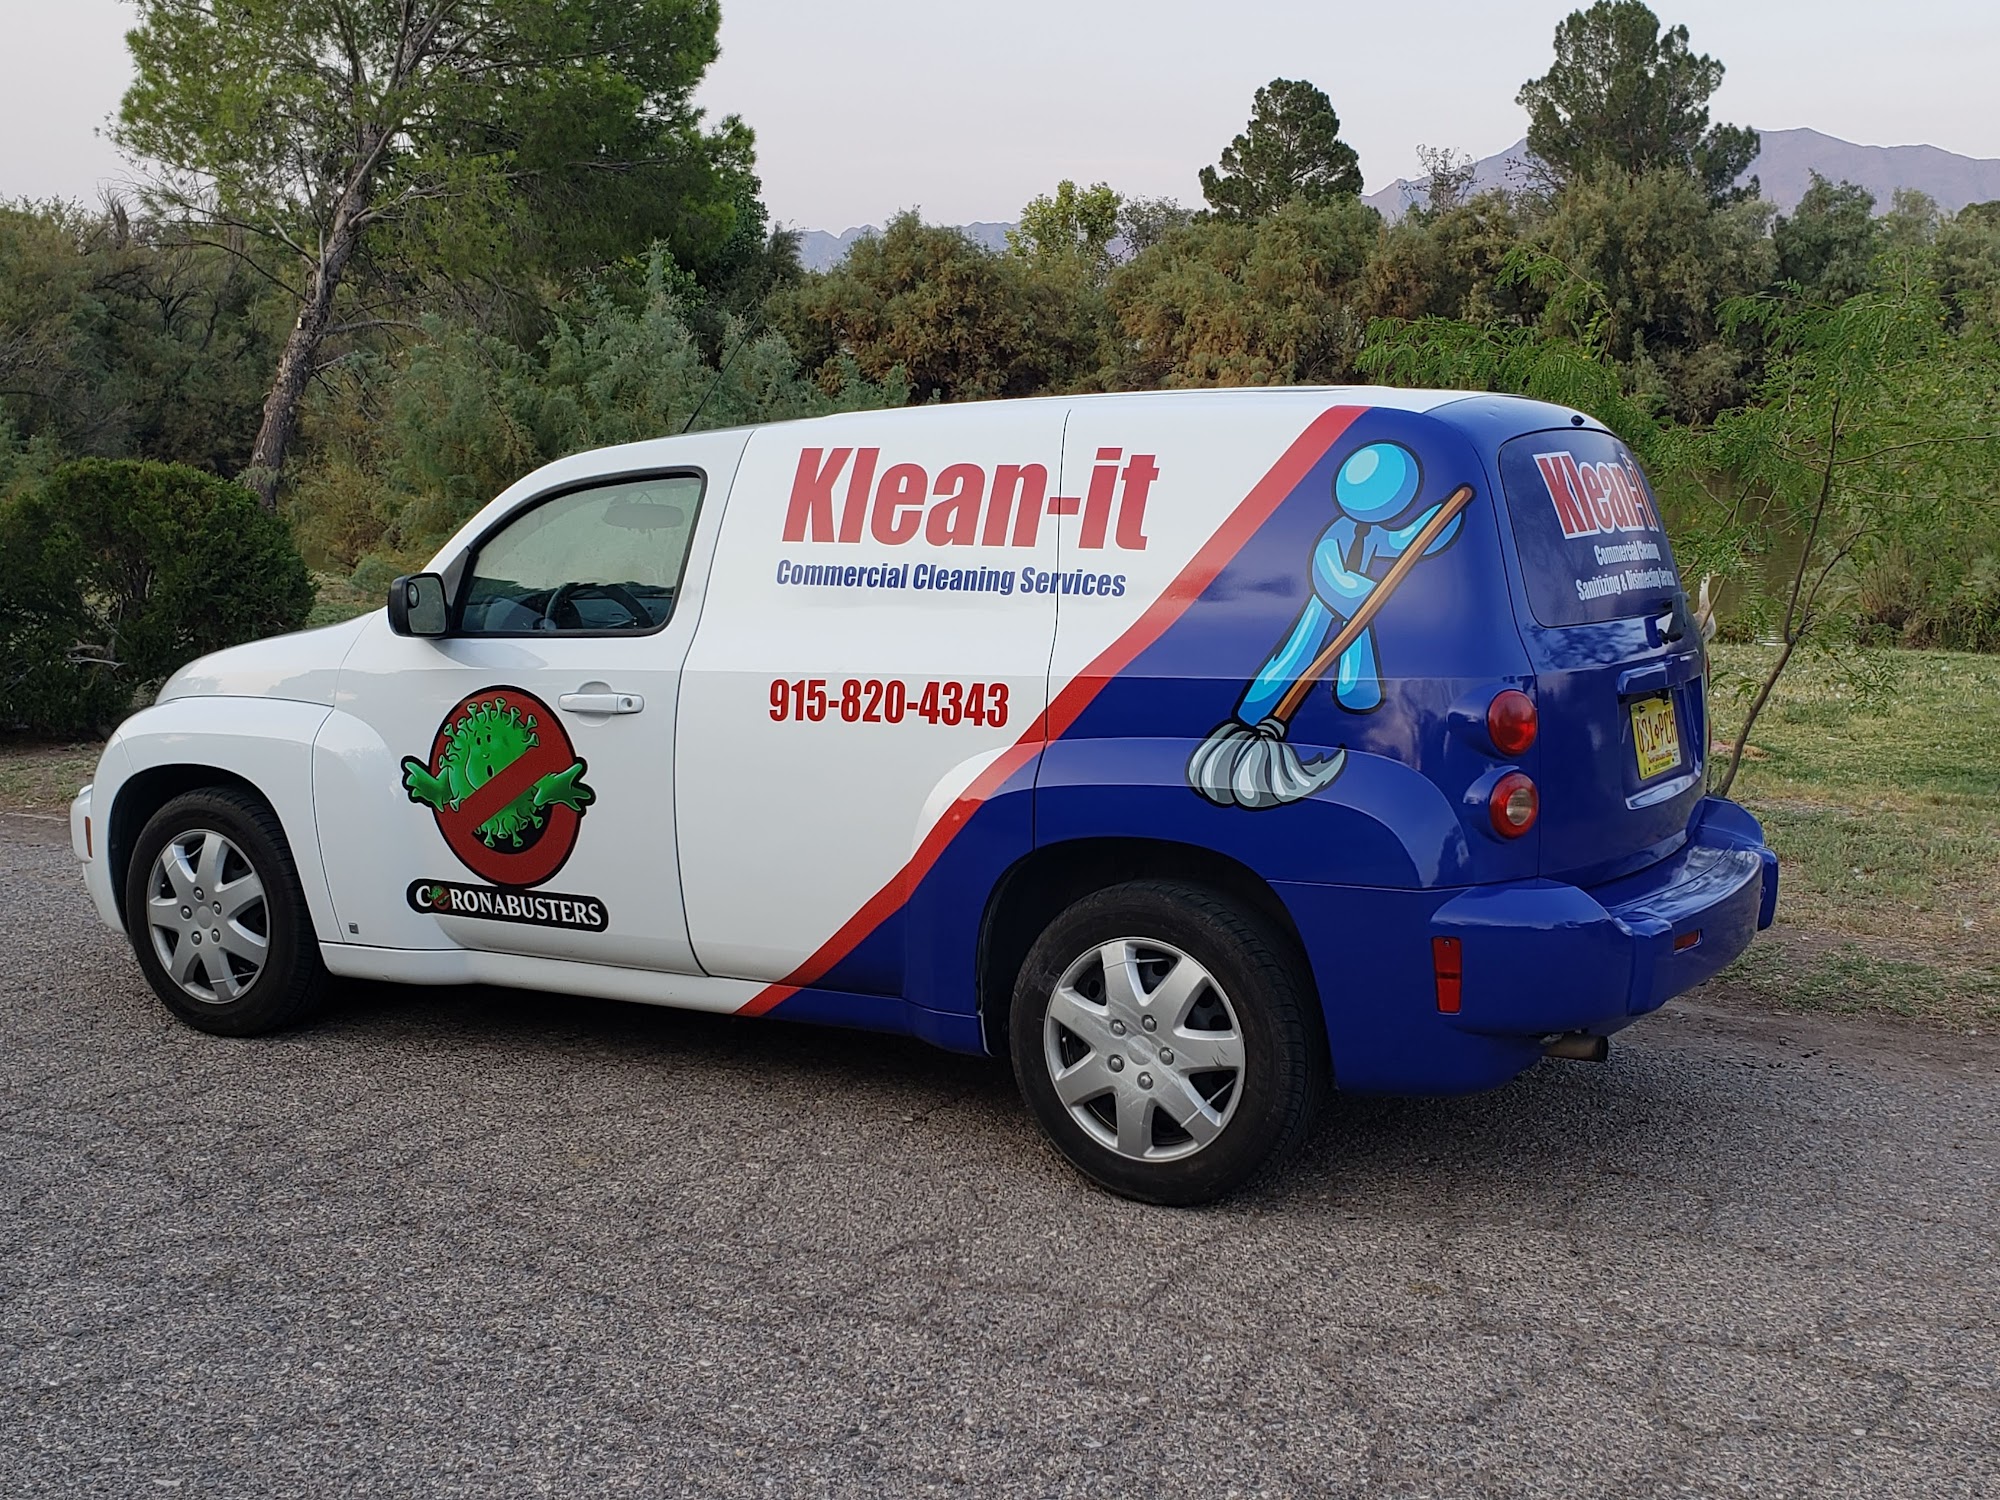 klean-it Janitorial Services